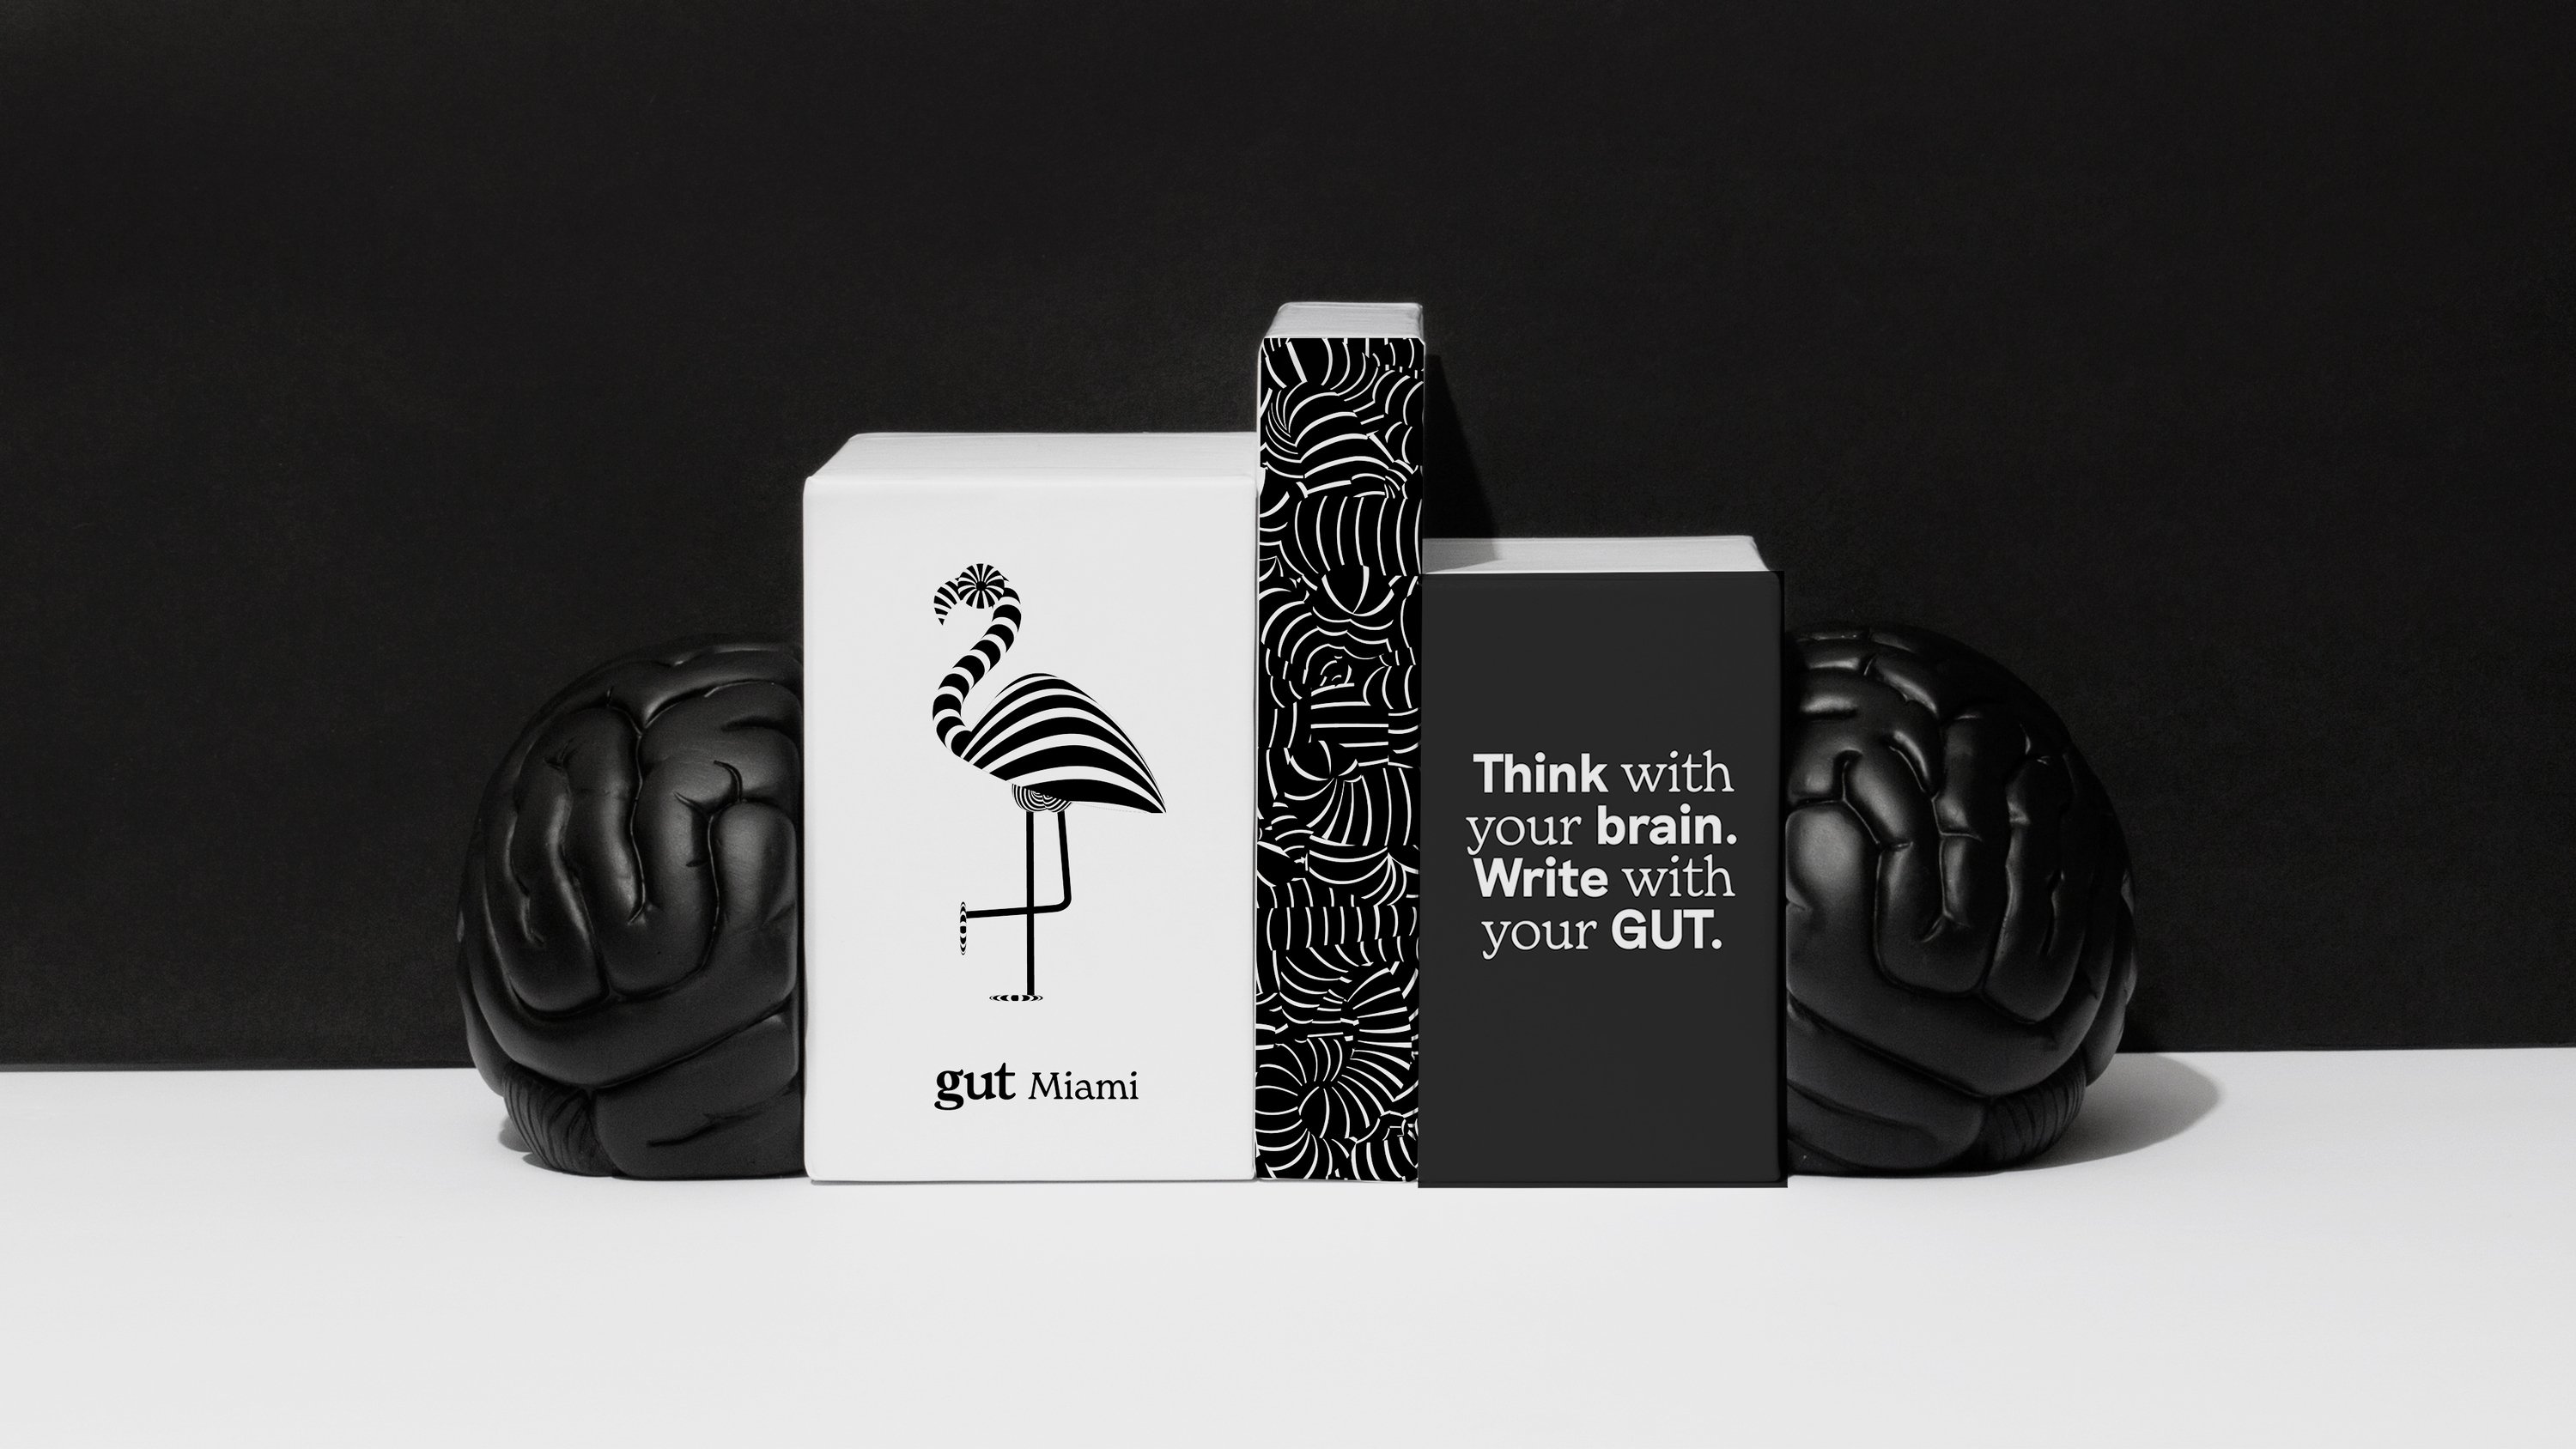 New logo, brand identity and motion graphics for creative network GUT designed by &Walsh